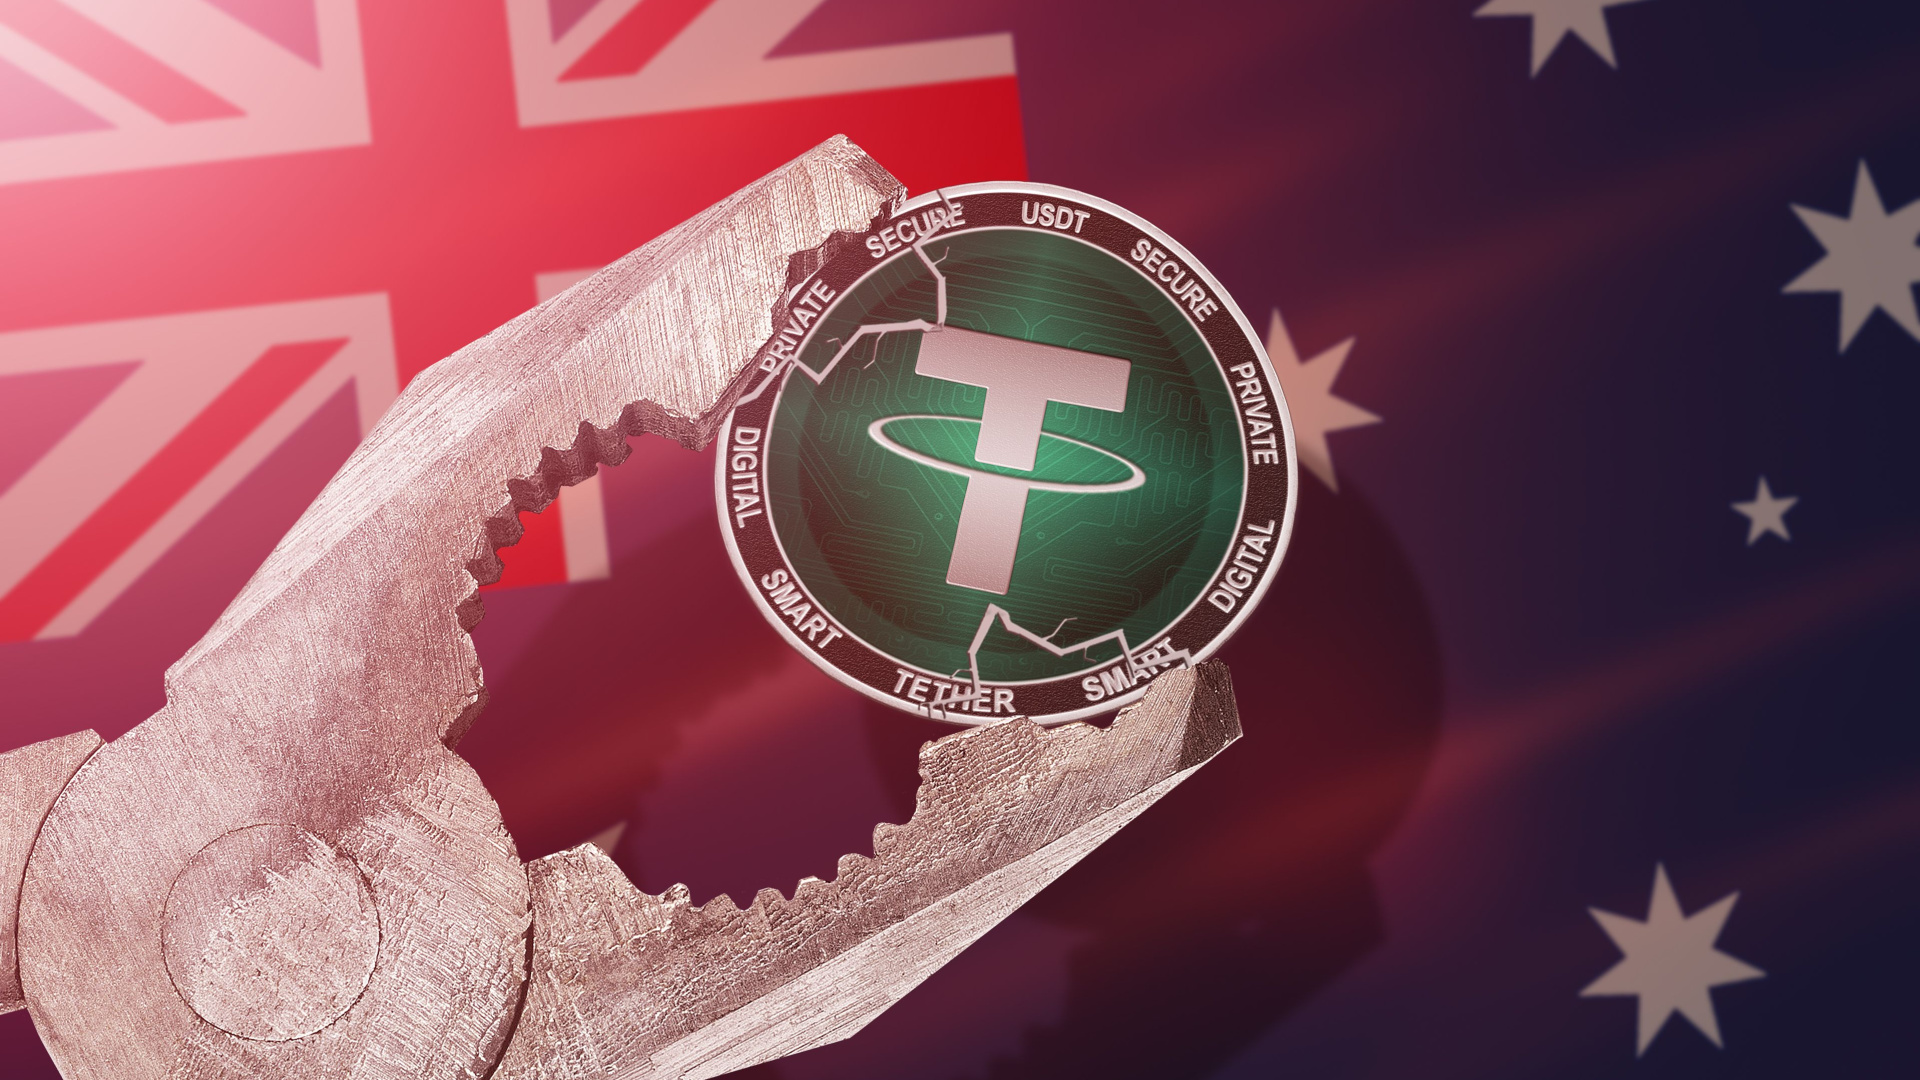 Australia – A bill to control stablecoins and the digital yuan